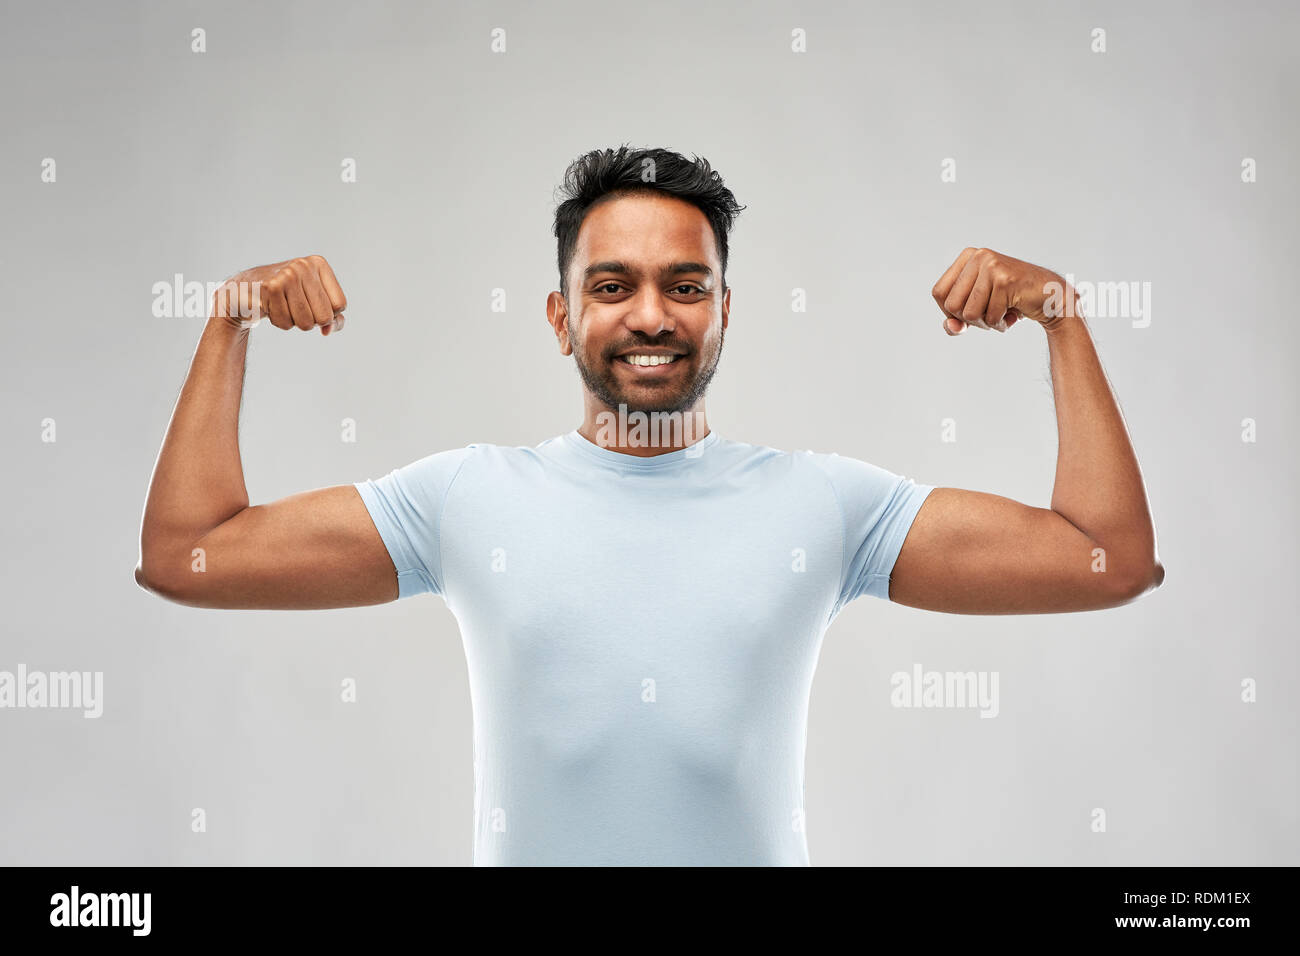 indian man showing biceps over grey background Stock Photo